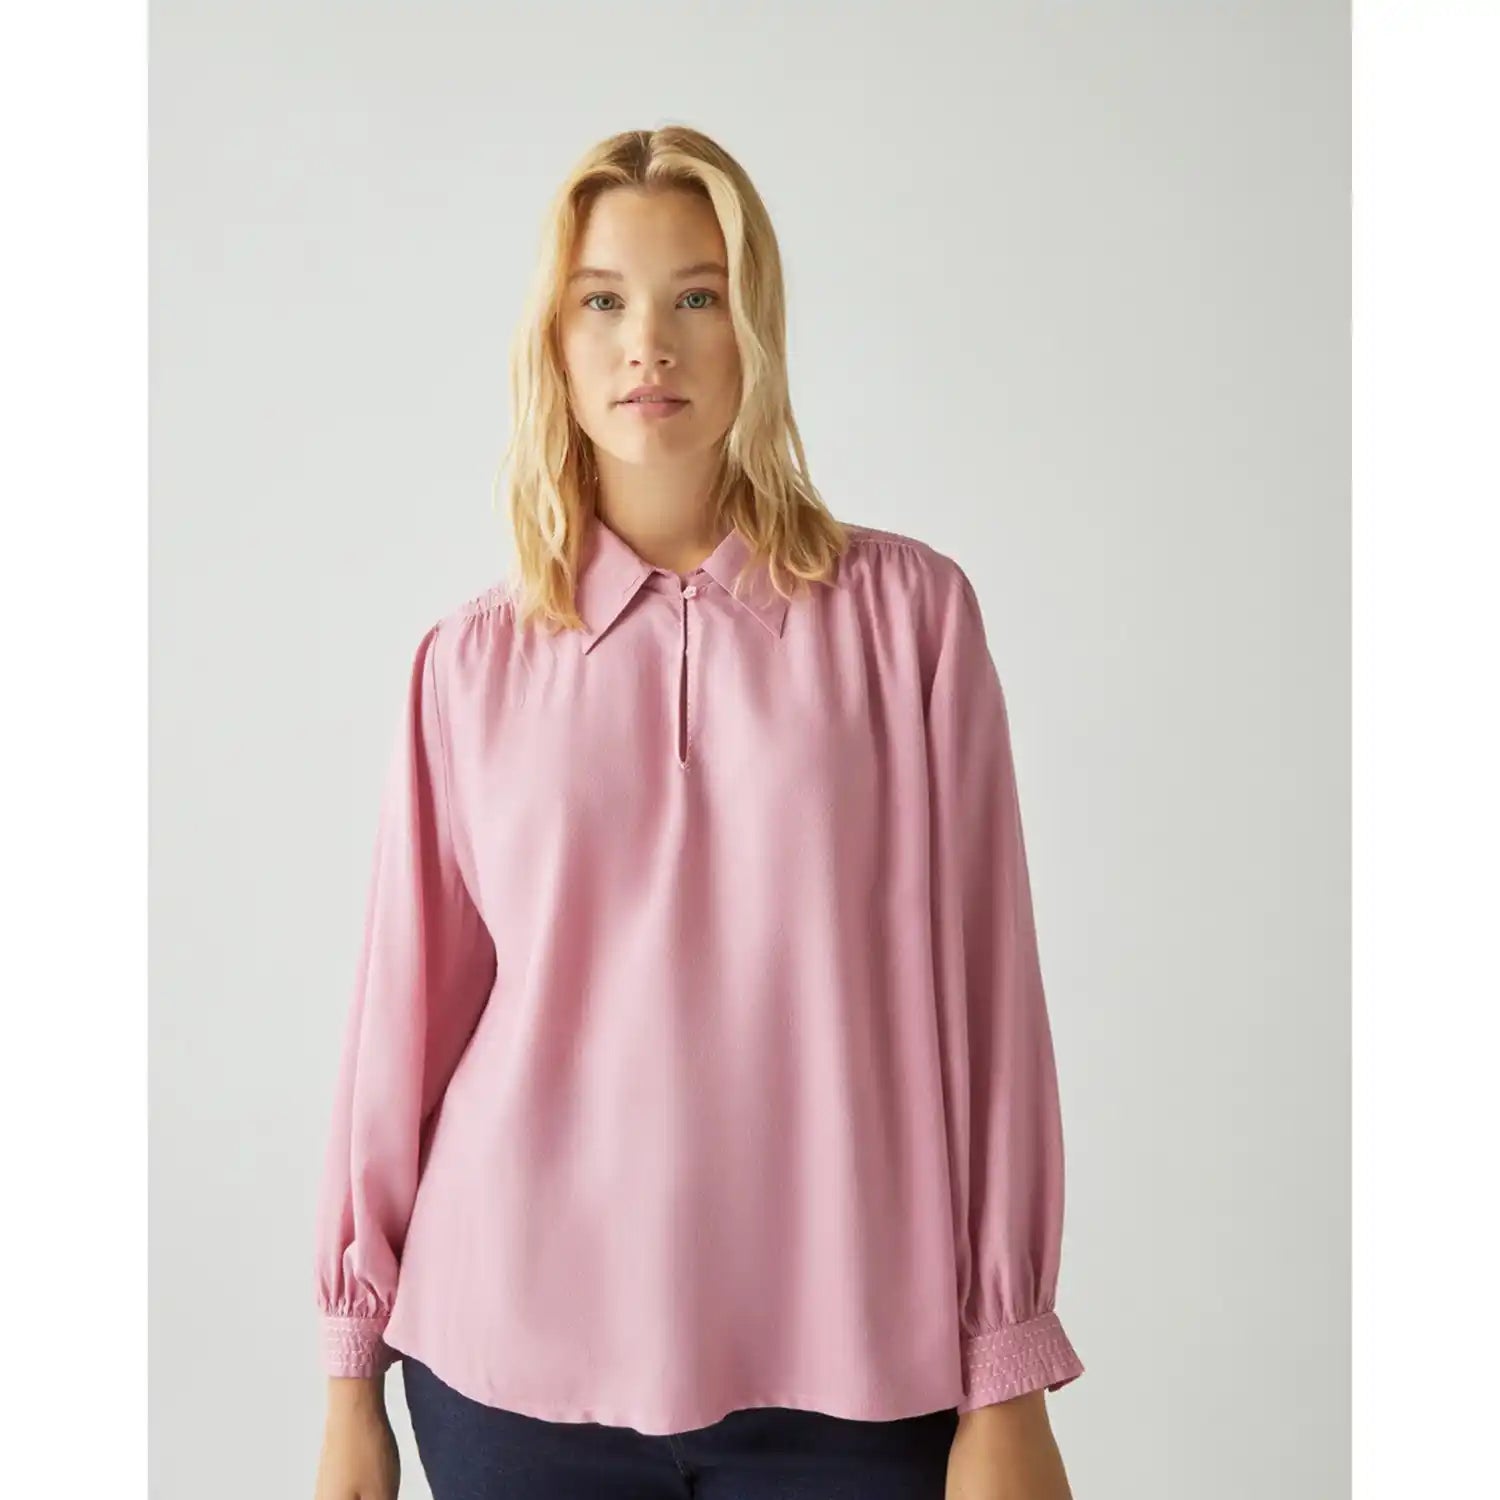 Couchel Plain Dobby Blouse - Pink 3 Shaws Department Stores